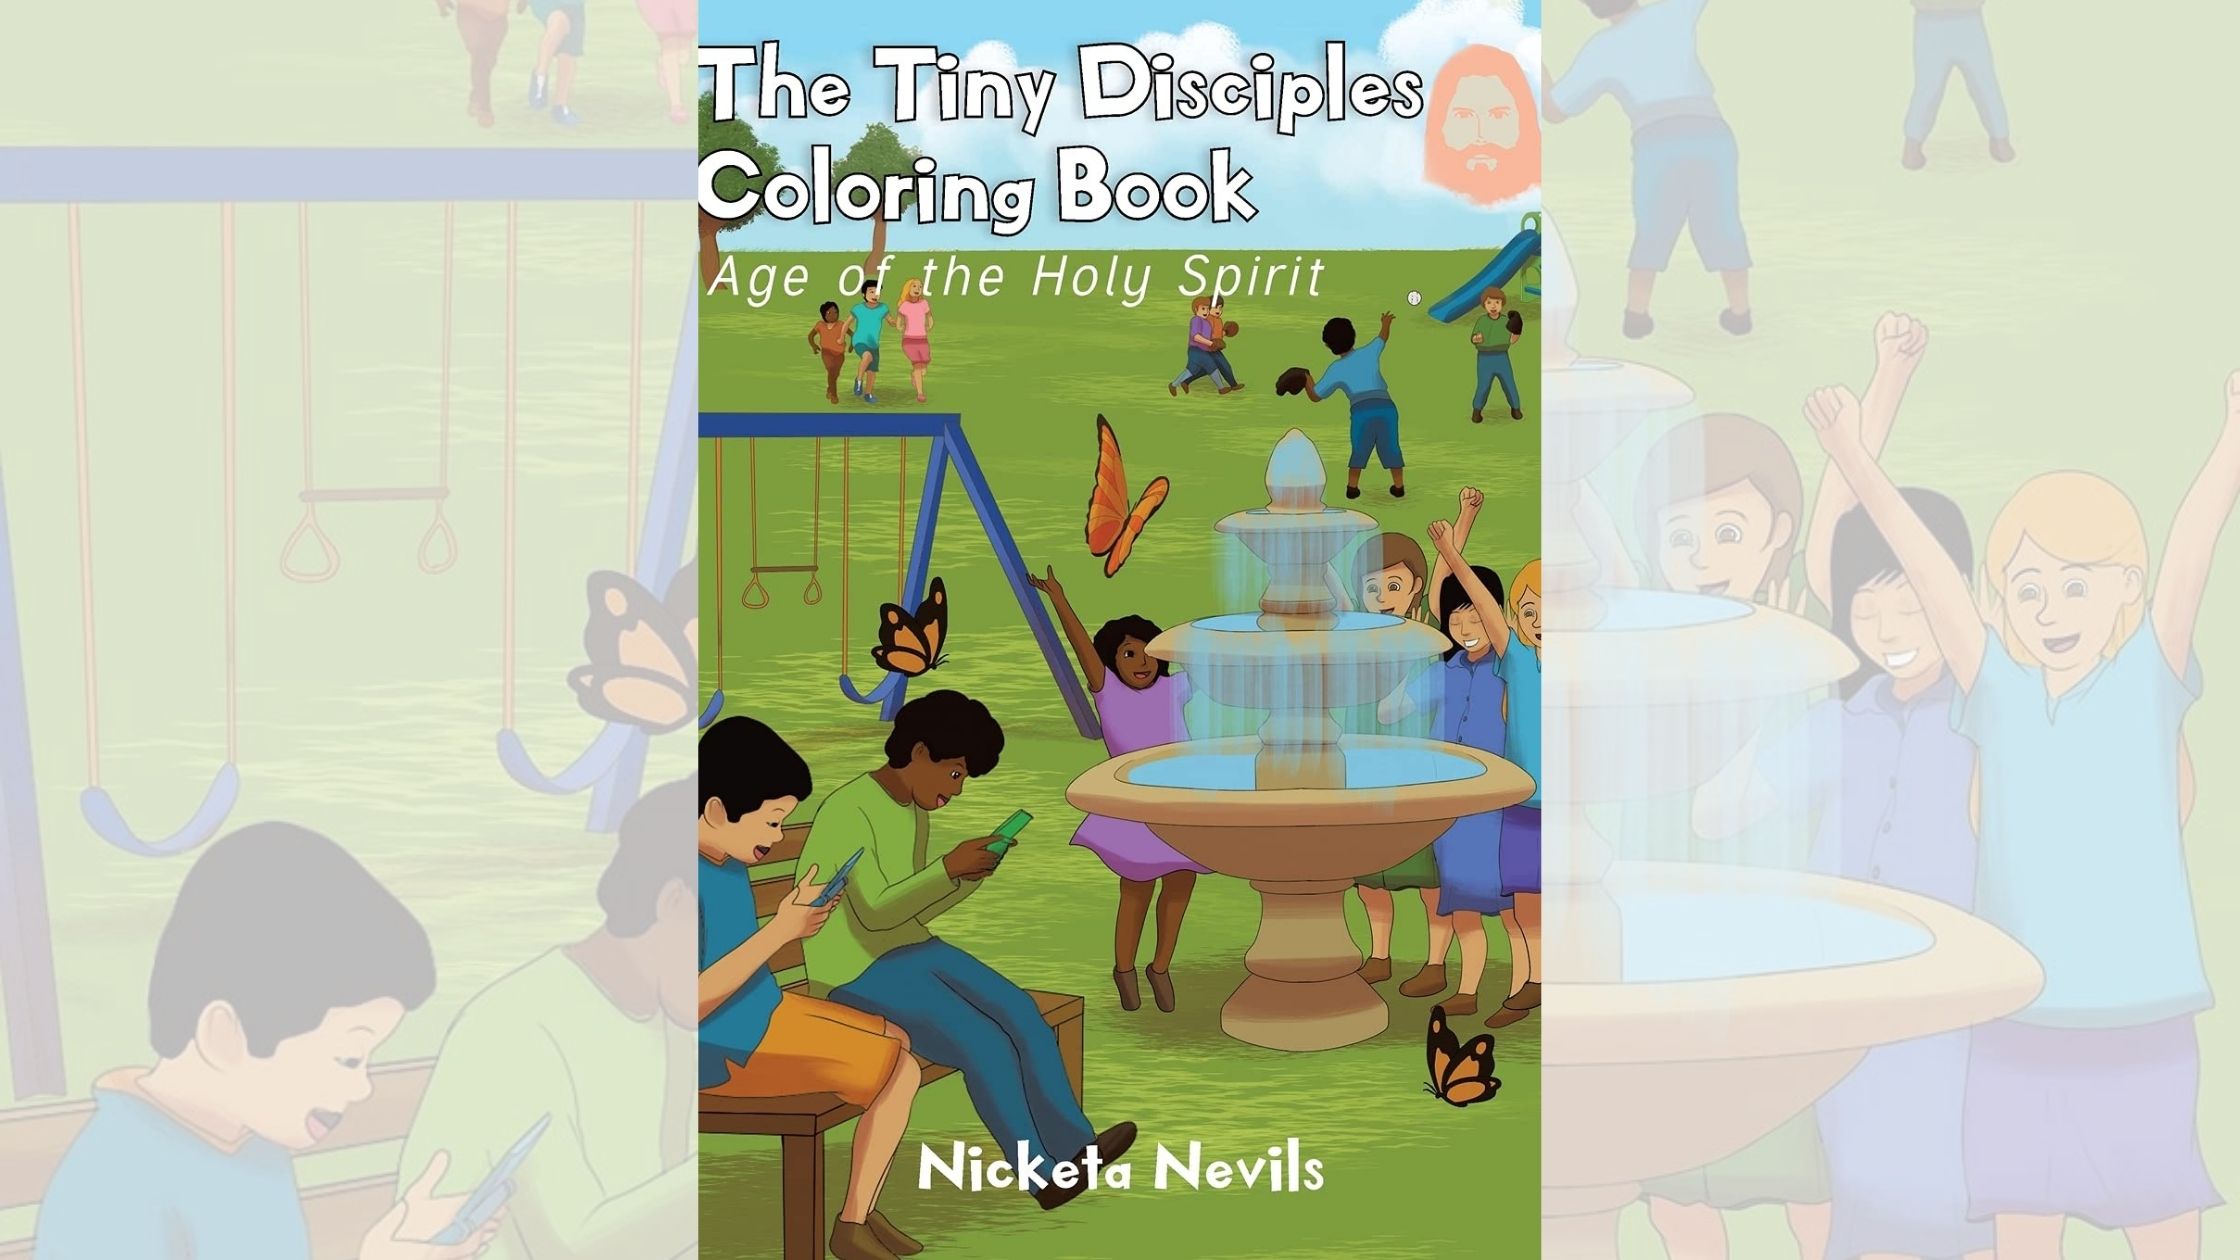 Nicketa Nevils’s newly released “The Tiny Disciples Coloring Book: Age of the Holy Spirit” is an enjoyable activity book